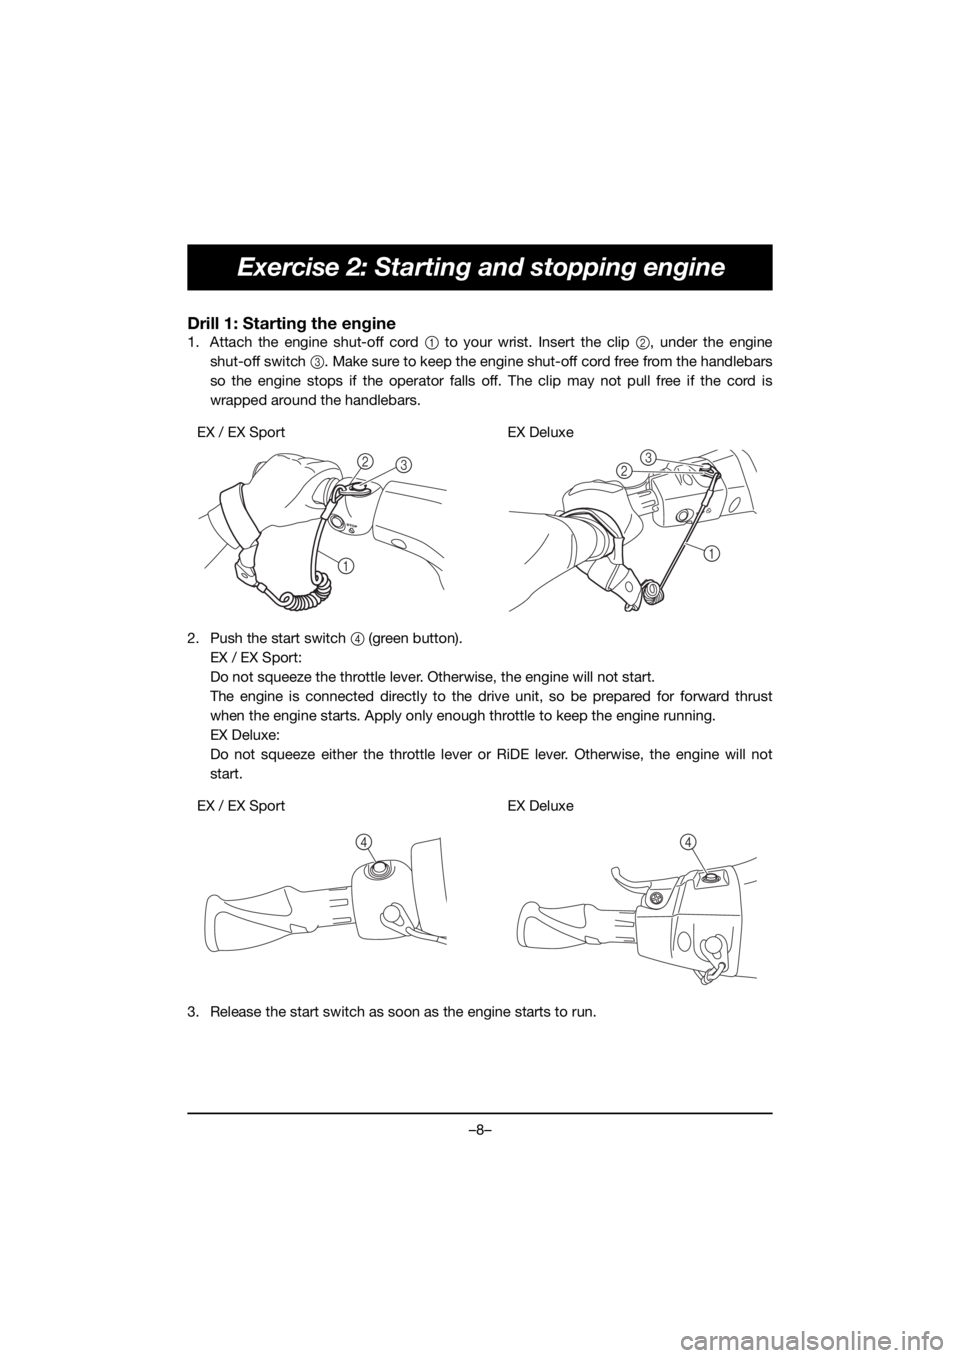 YAMAHA EX DELUXE 2020  Manuale de Empleo (in Spanish) –8–
Exercise 2: Starting and stopping engine
Drill 1: Starting the engine
1. Attach the engine shut-off cord 1 to your wrist. Insert the clip 2, under the engine
shut-off switch 3. Make sure to ke